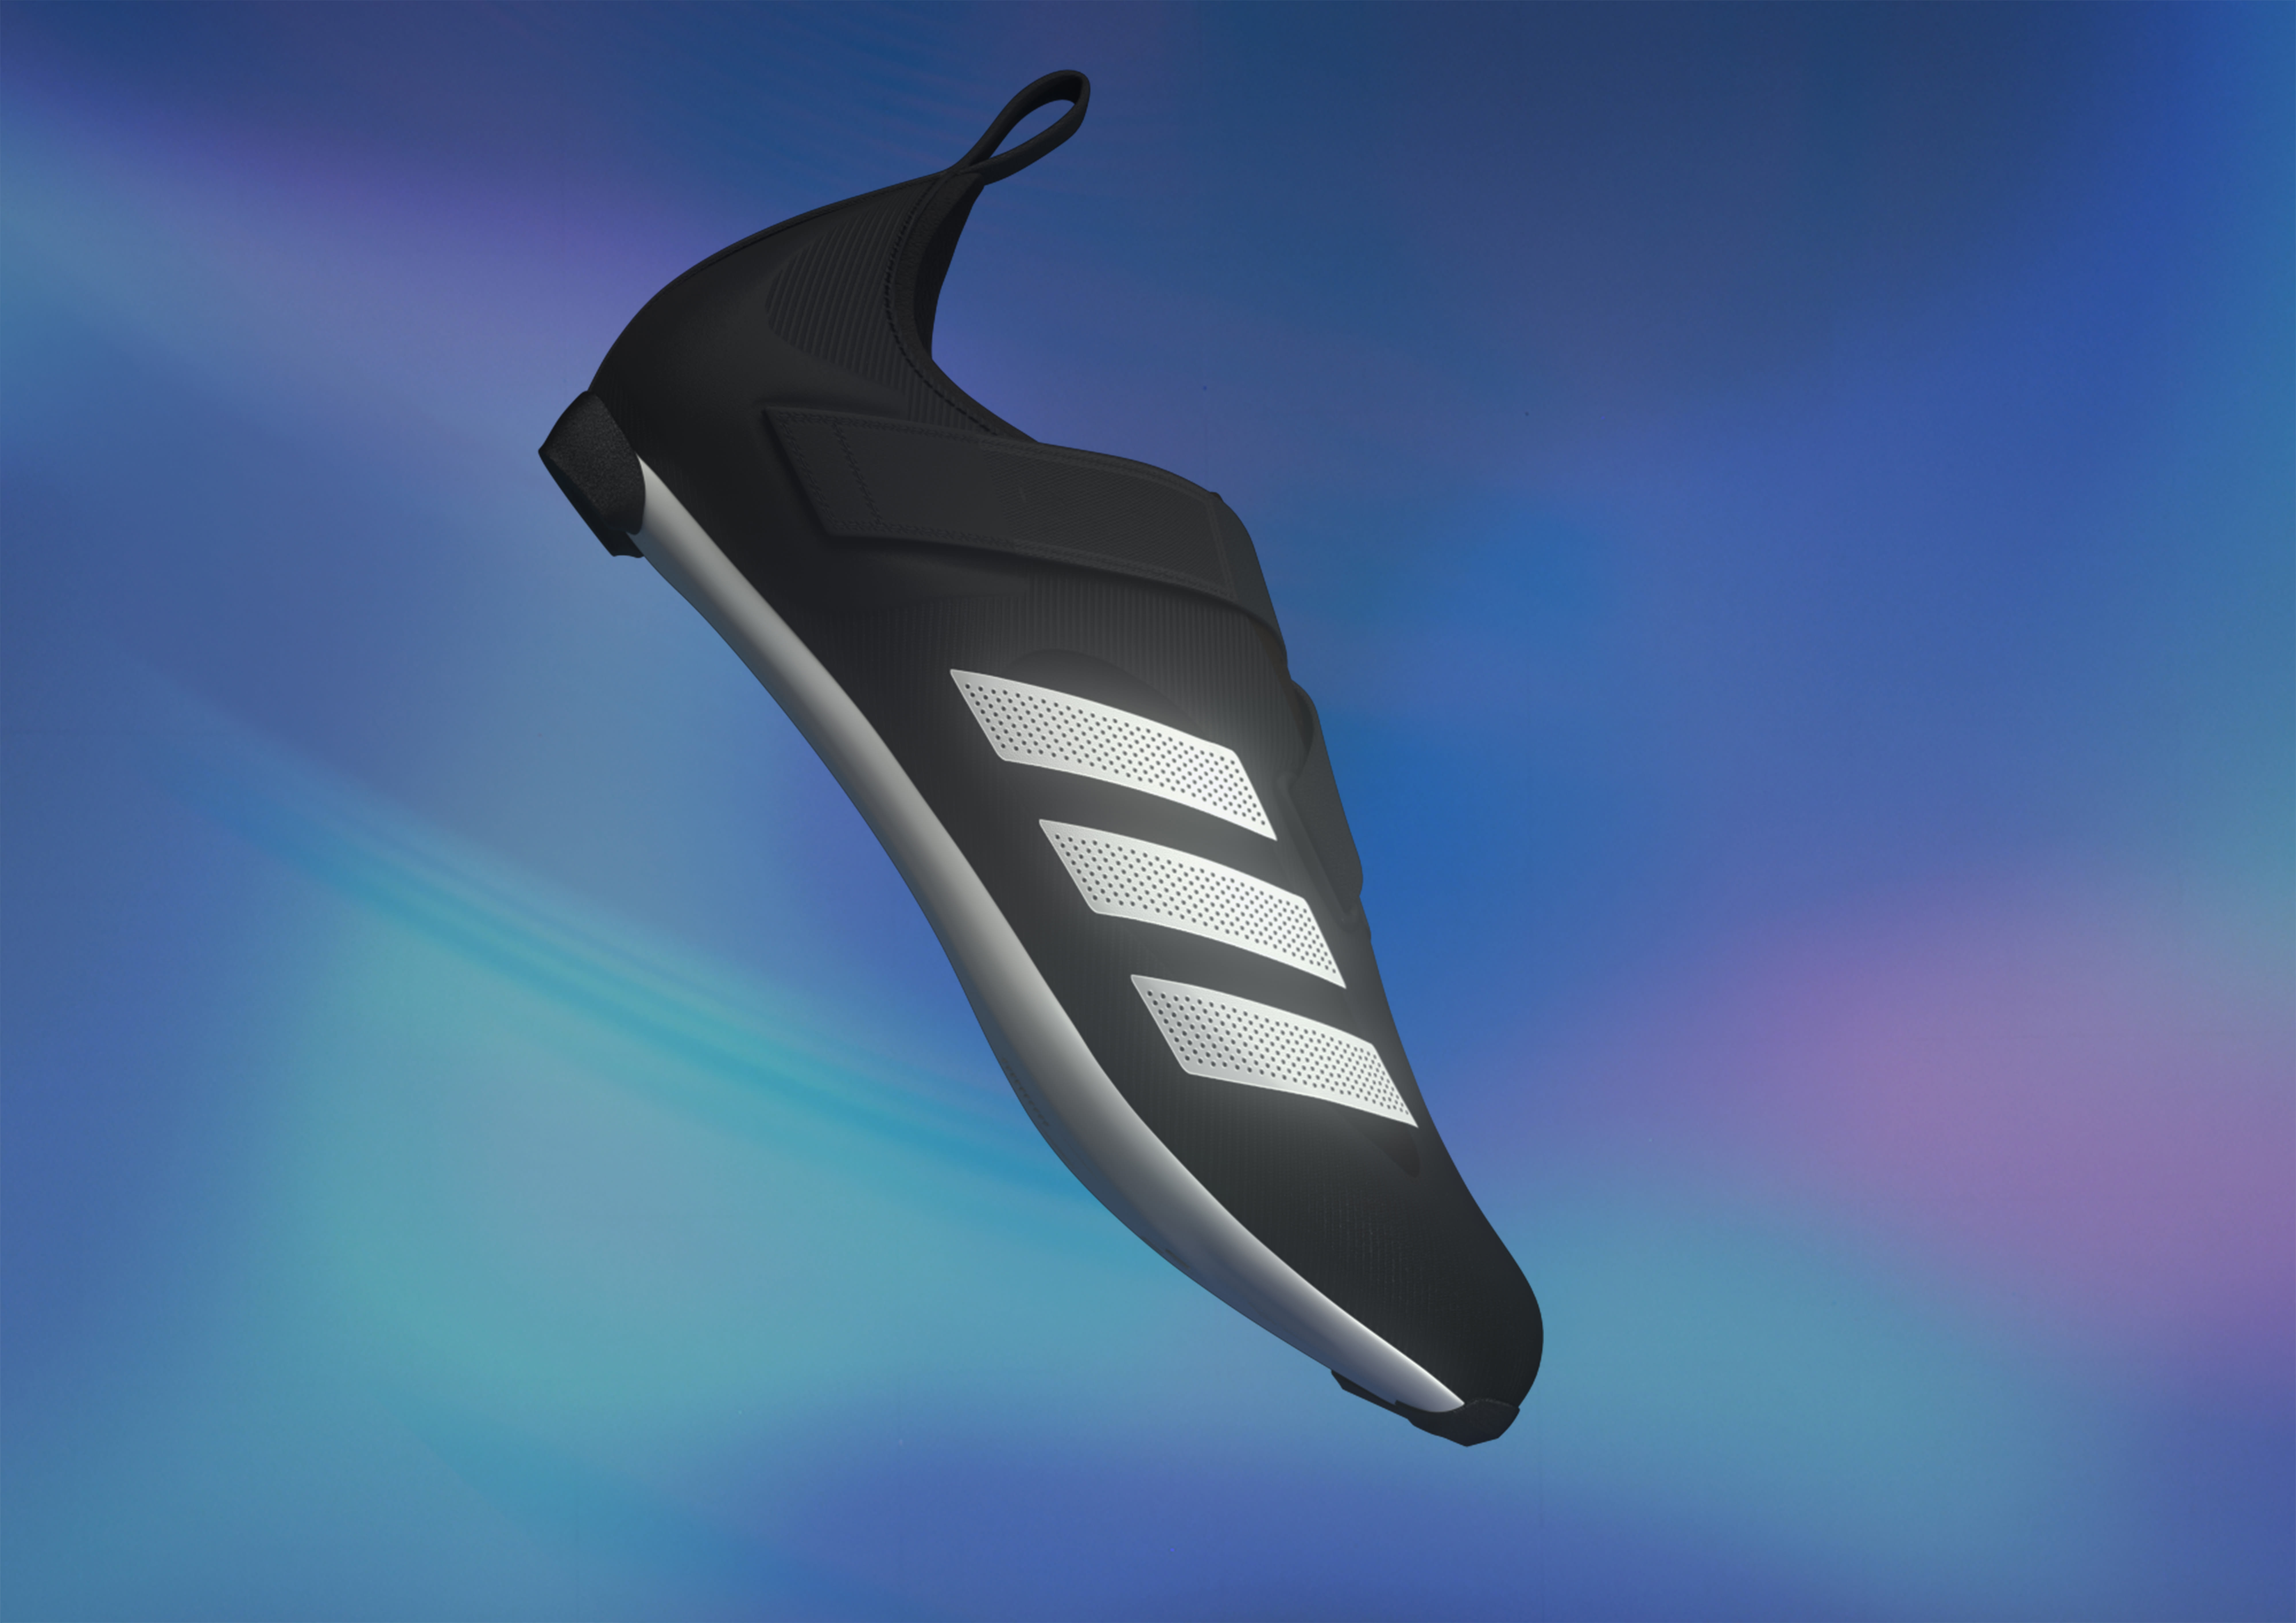 An indoor cycling shoe floating with a blue background.